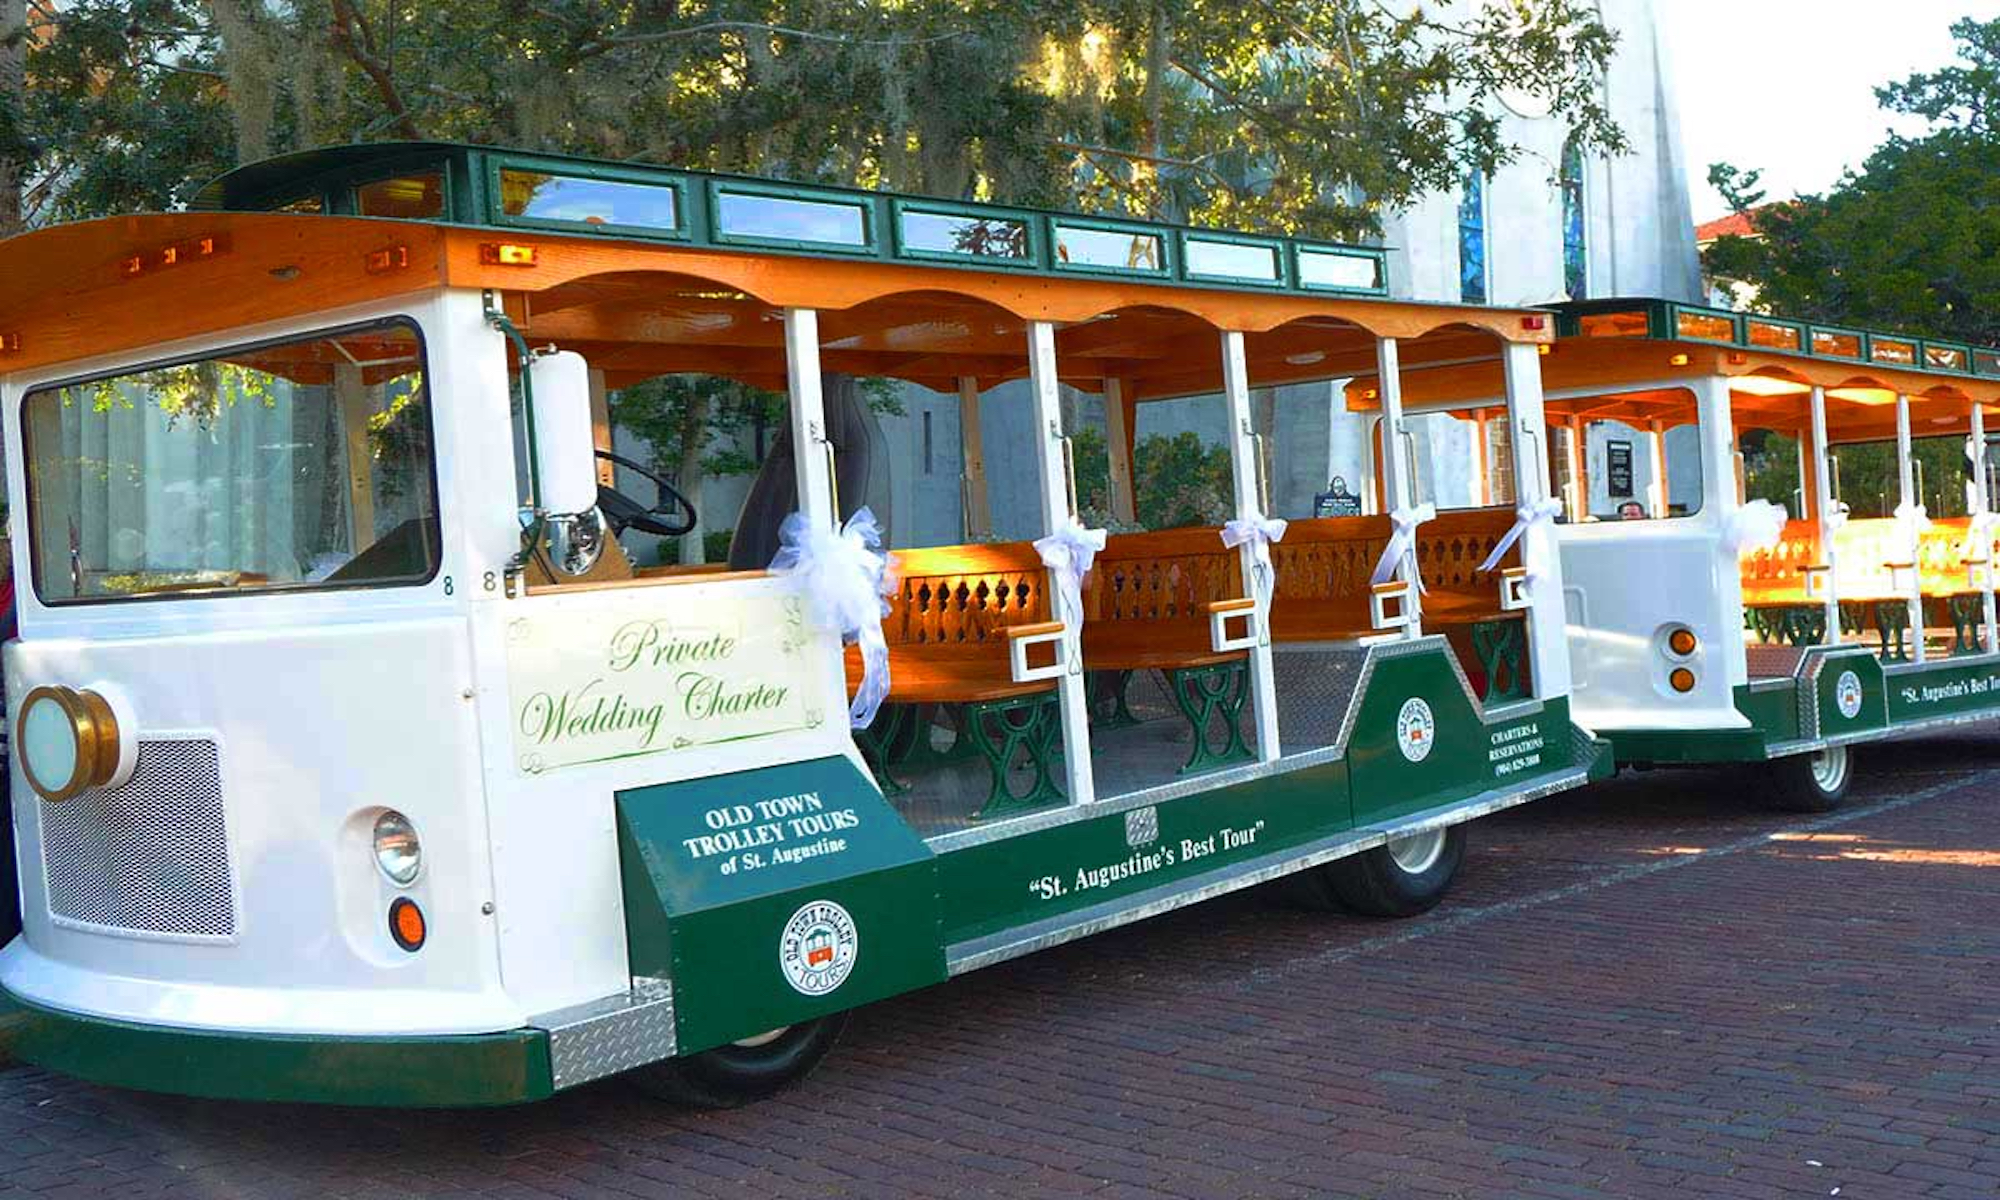 The Old Town Trolley wedding charter 